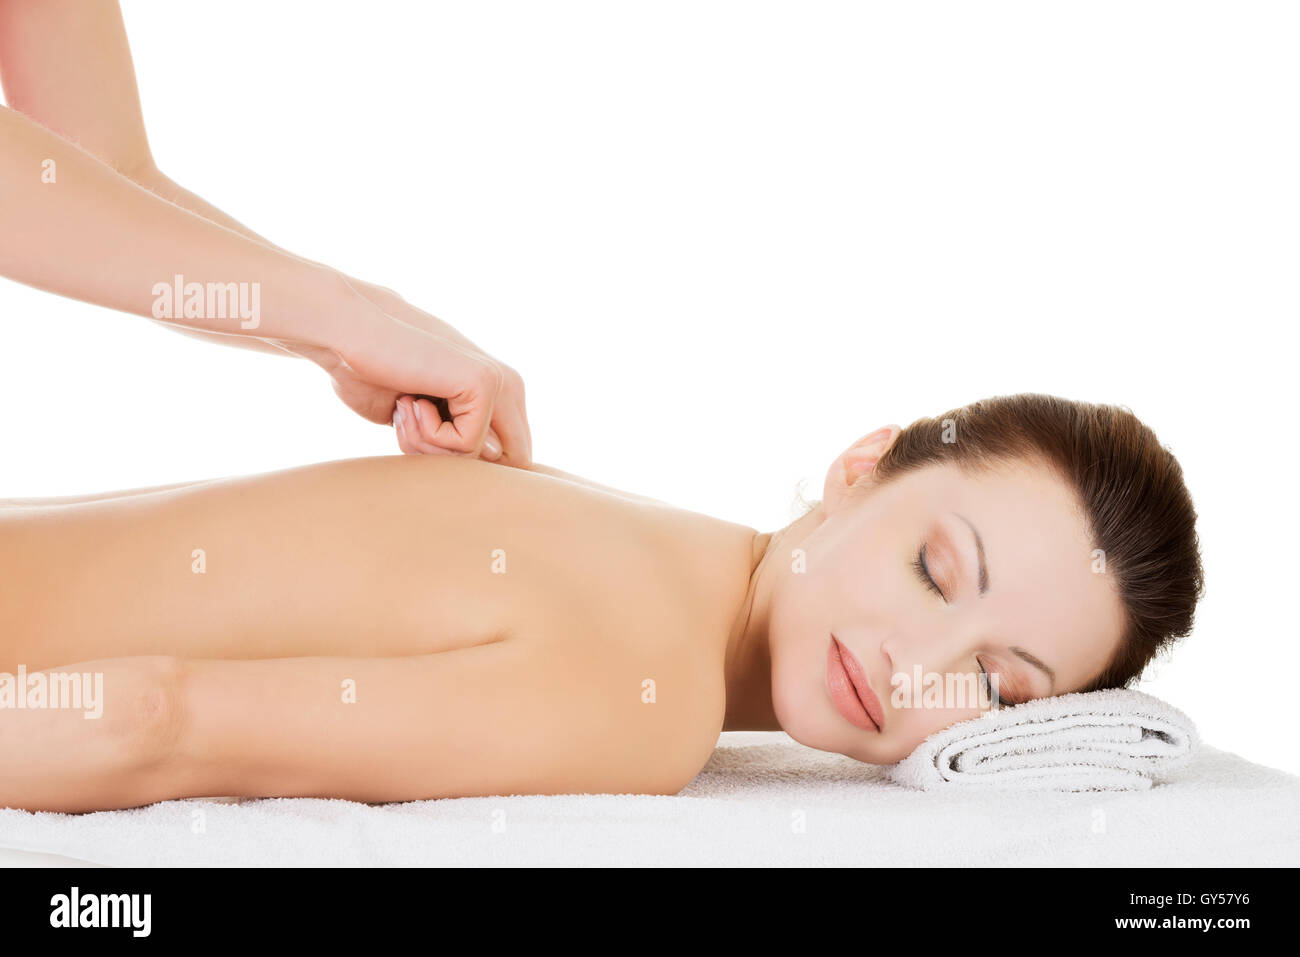 Preaty woman relaxing being massaged in spa saloon. Stock Photo